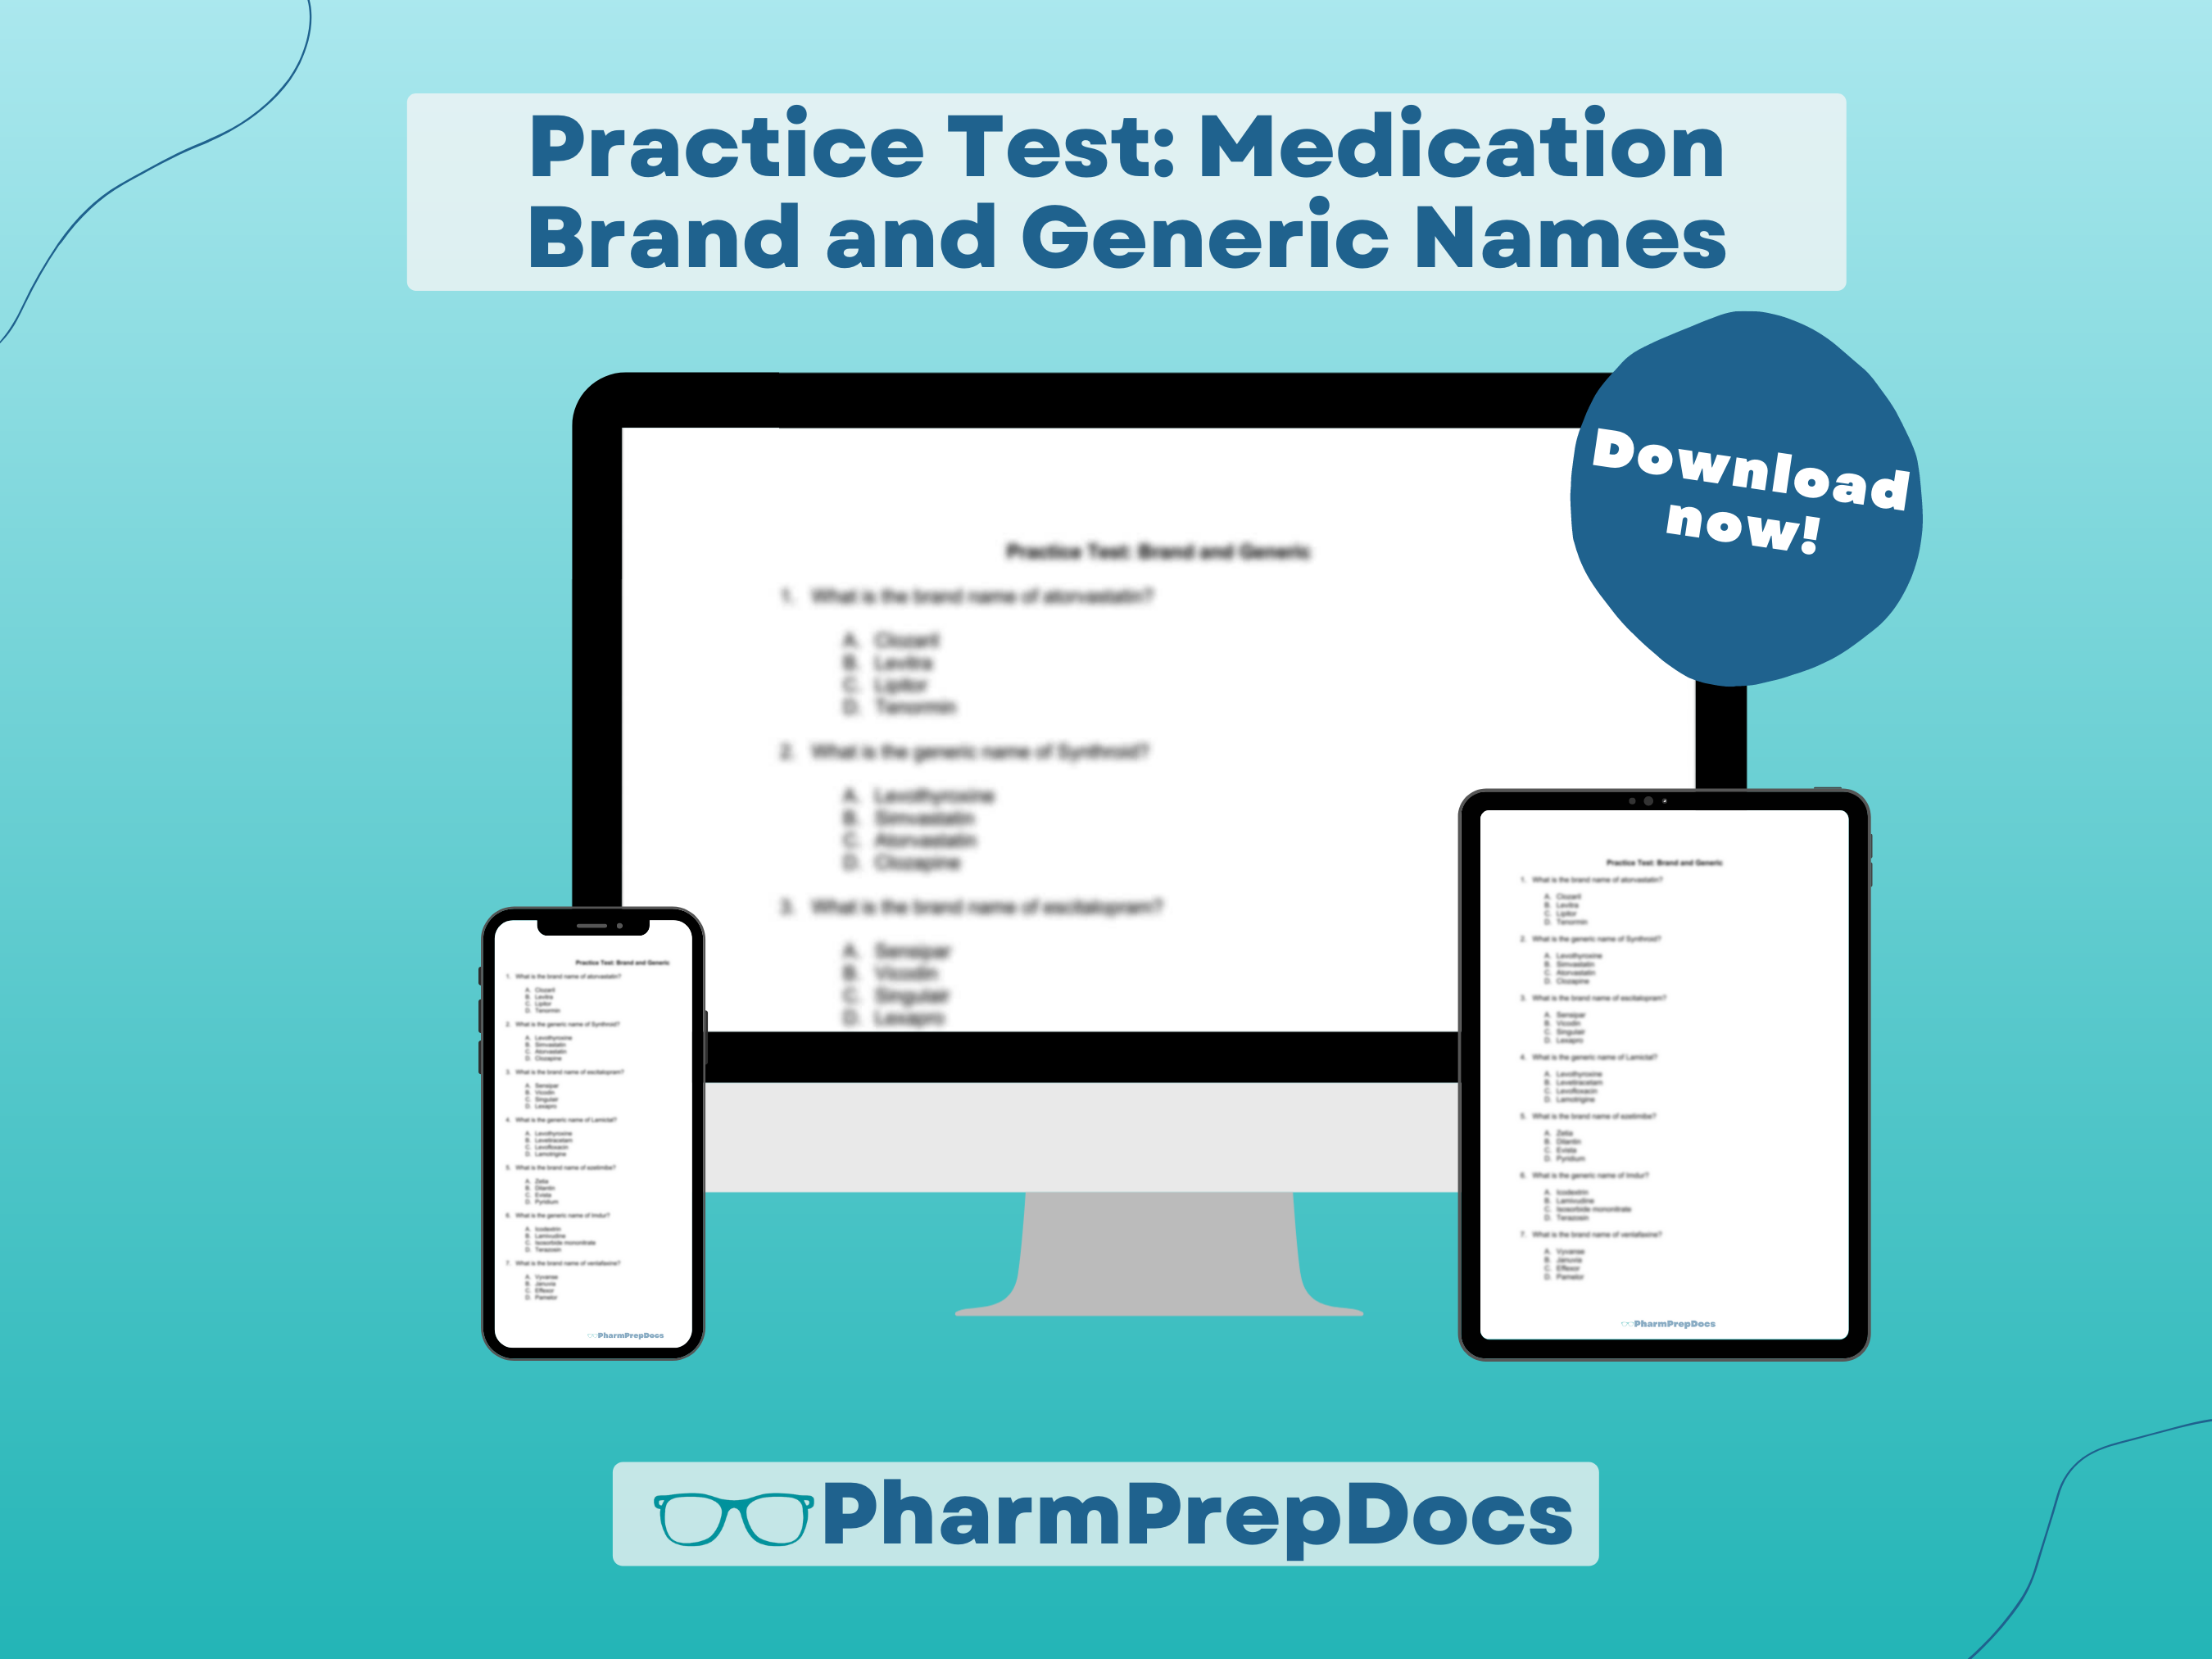 Practice Test: Medication Brand and Generic Names